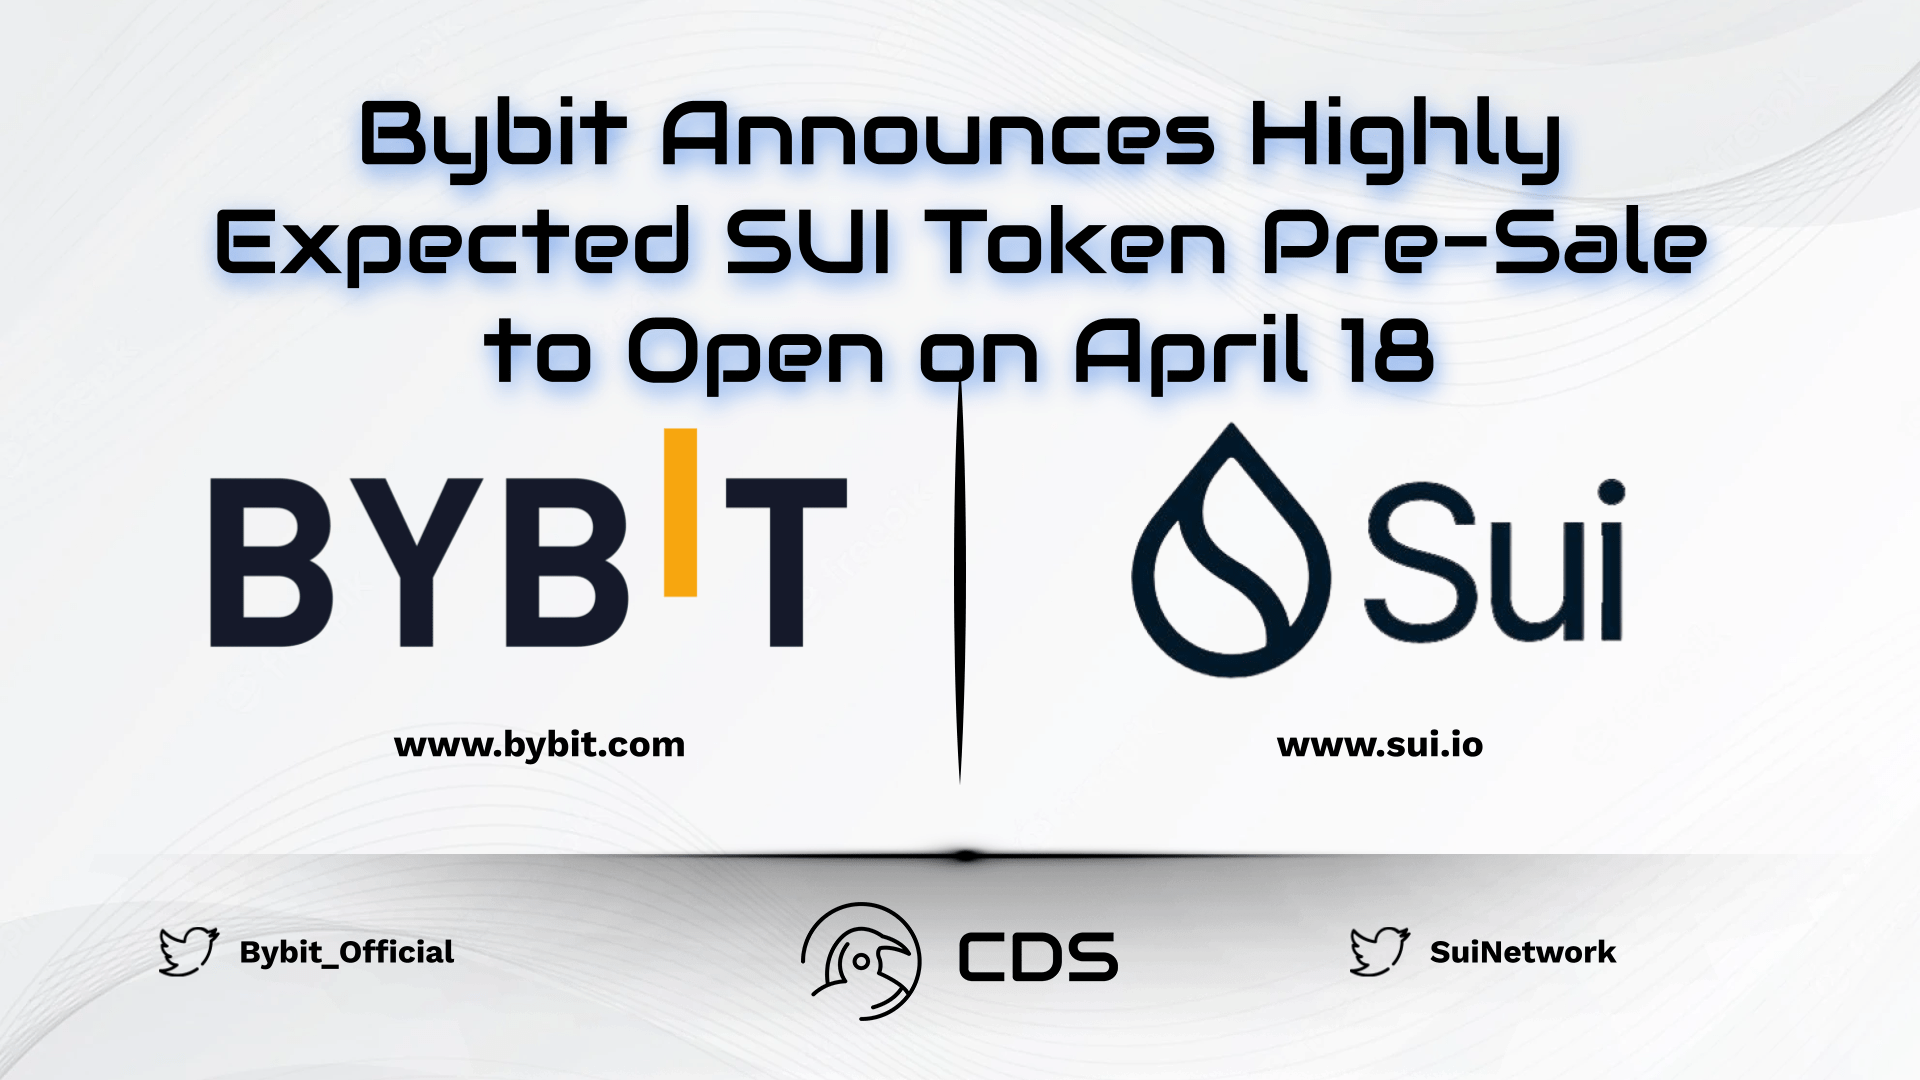 Bybit Announces Highly Expected SUI Token Pre-Sale to Open on April 18